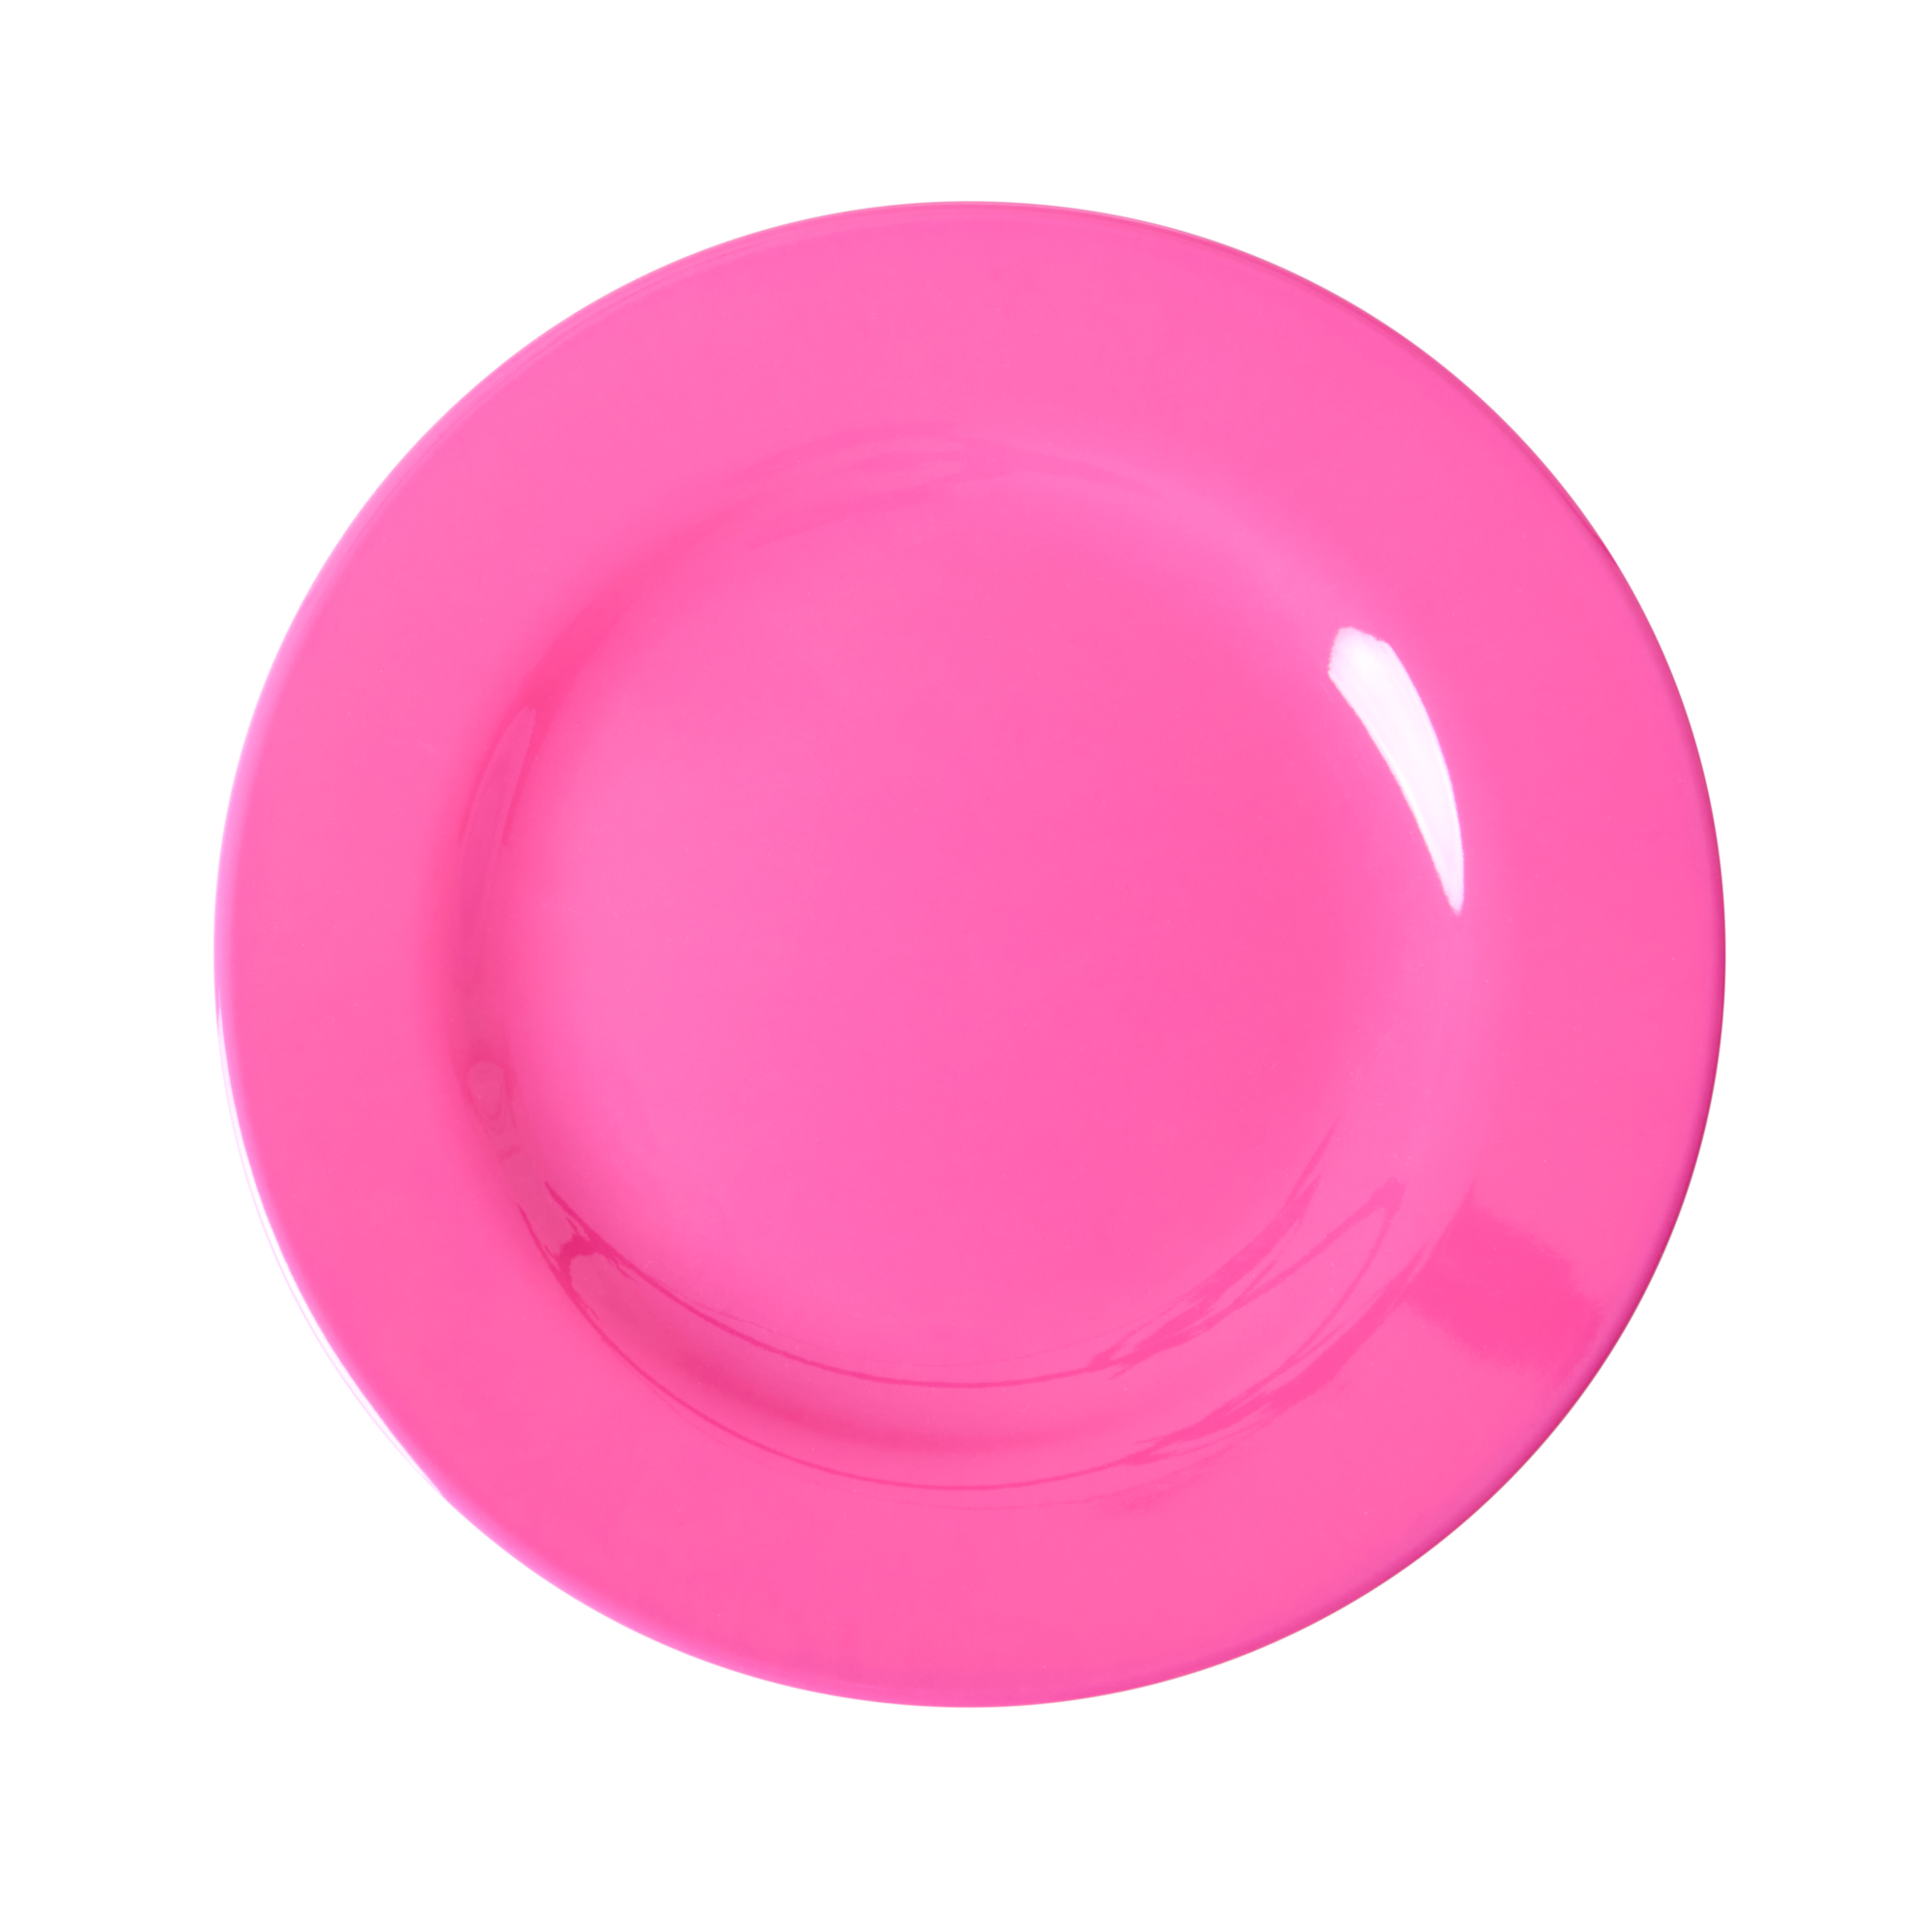 Melamine side plate by Rice by Rice in the color pink